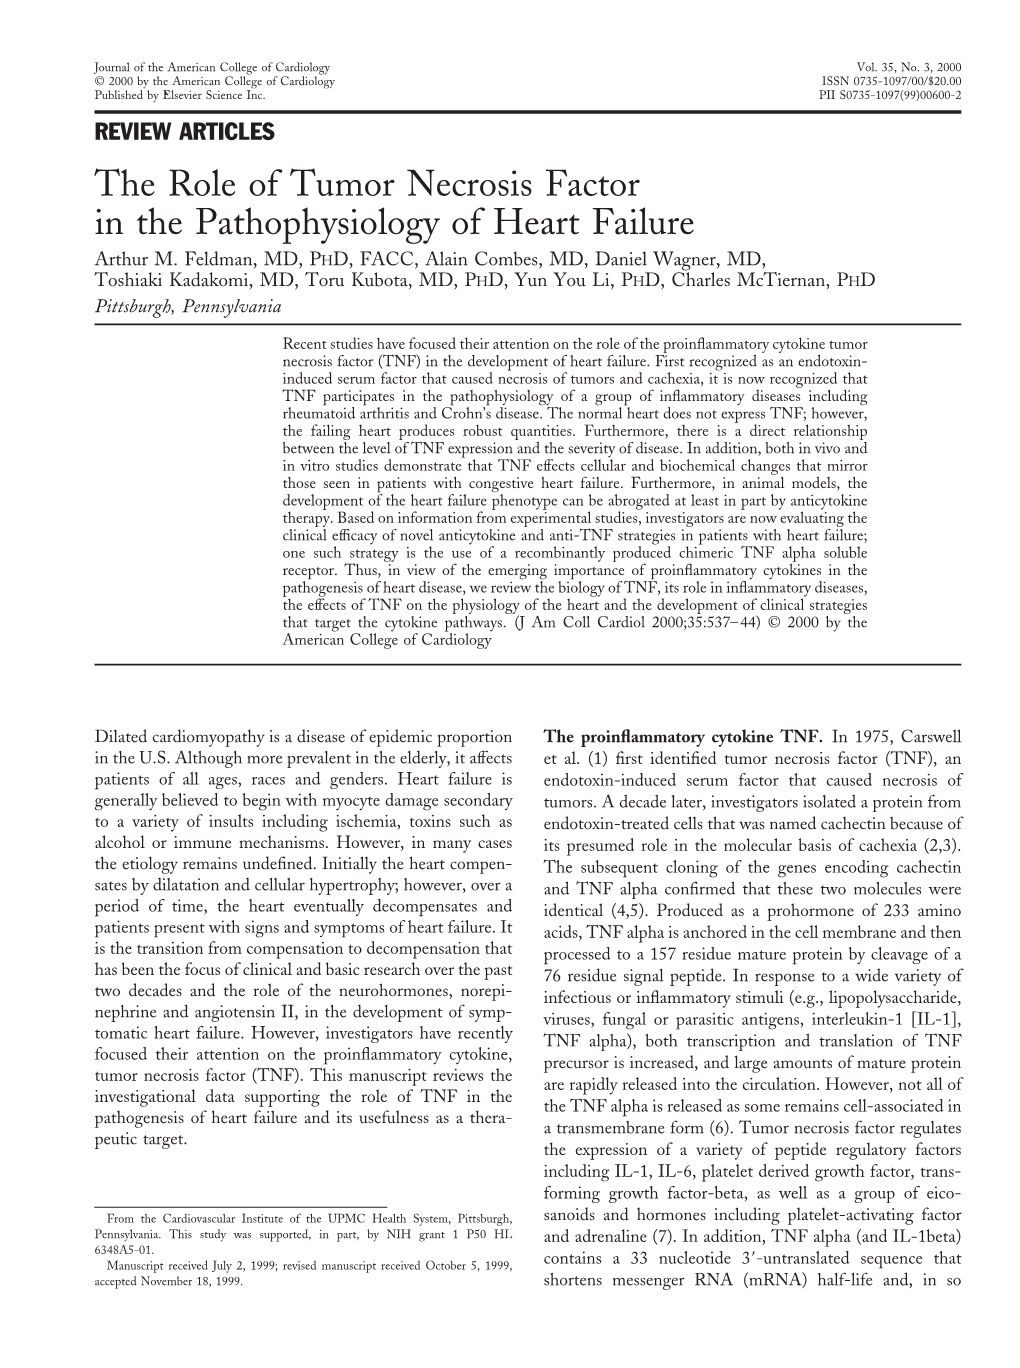 The Role of Tumor Necrosis Factor in the Pathophysiology of Heart Failure Arthur M